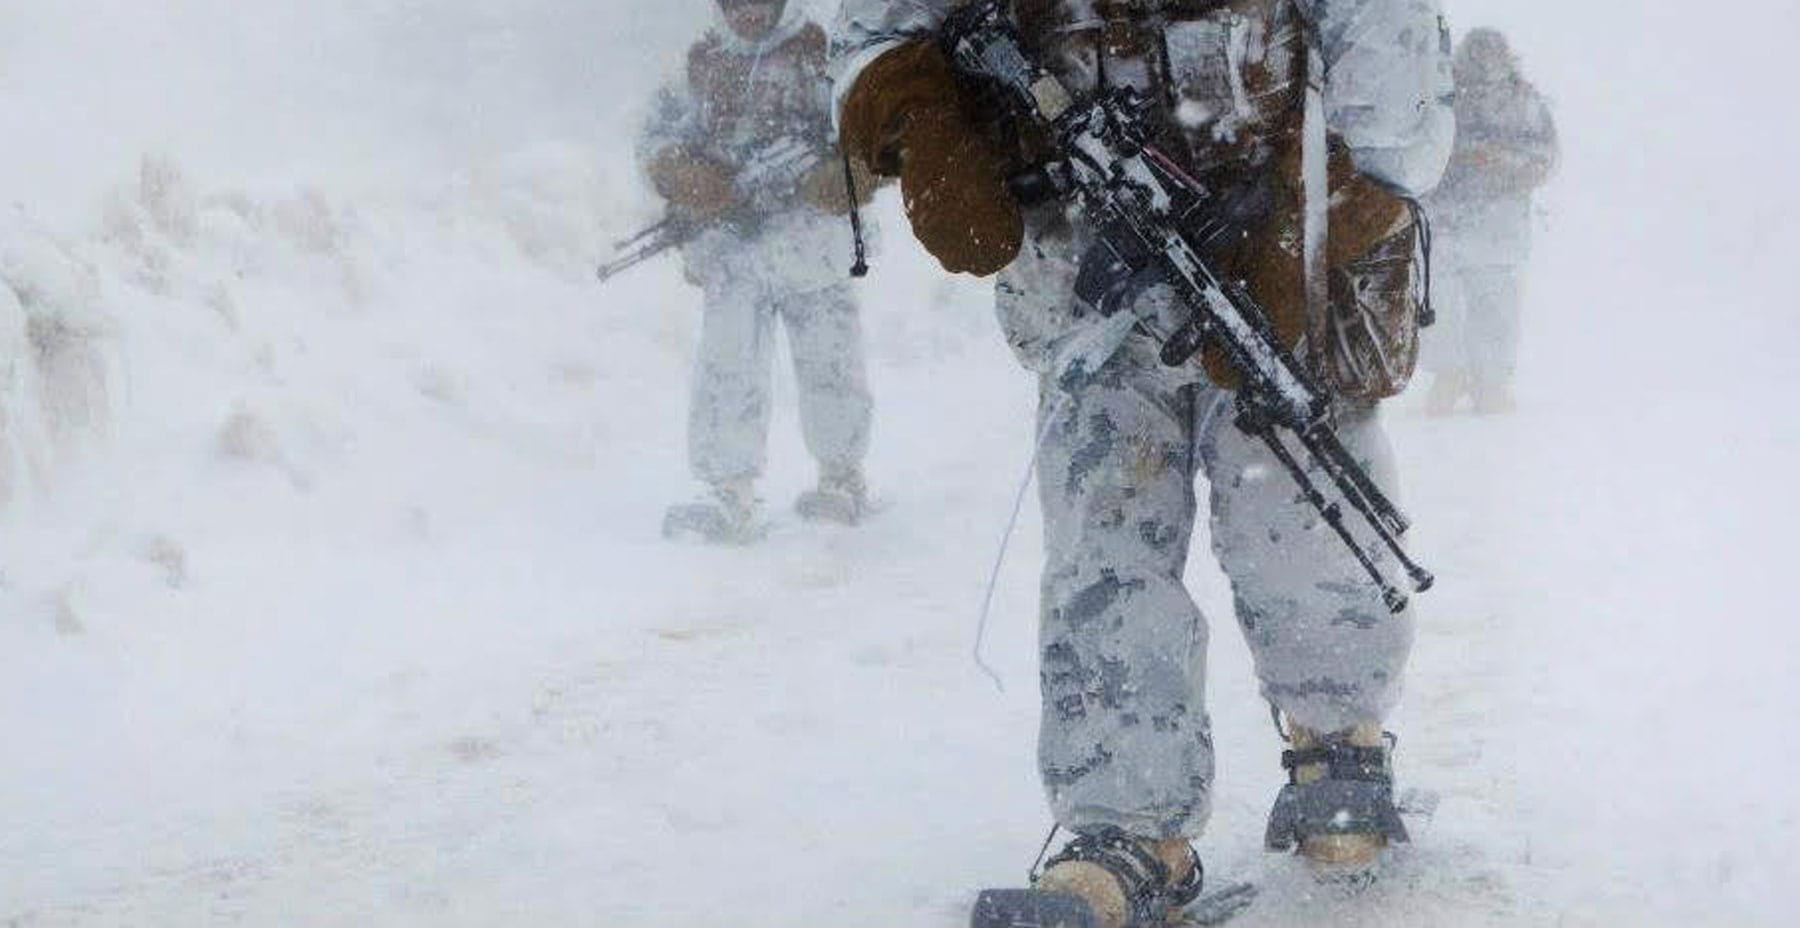 Soldiers in snow wearing Vapor Barrier Bunny Boot